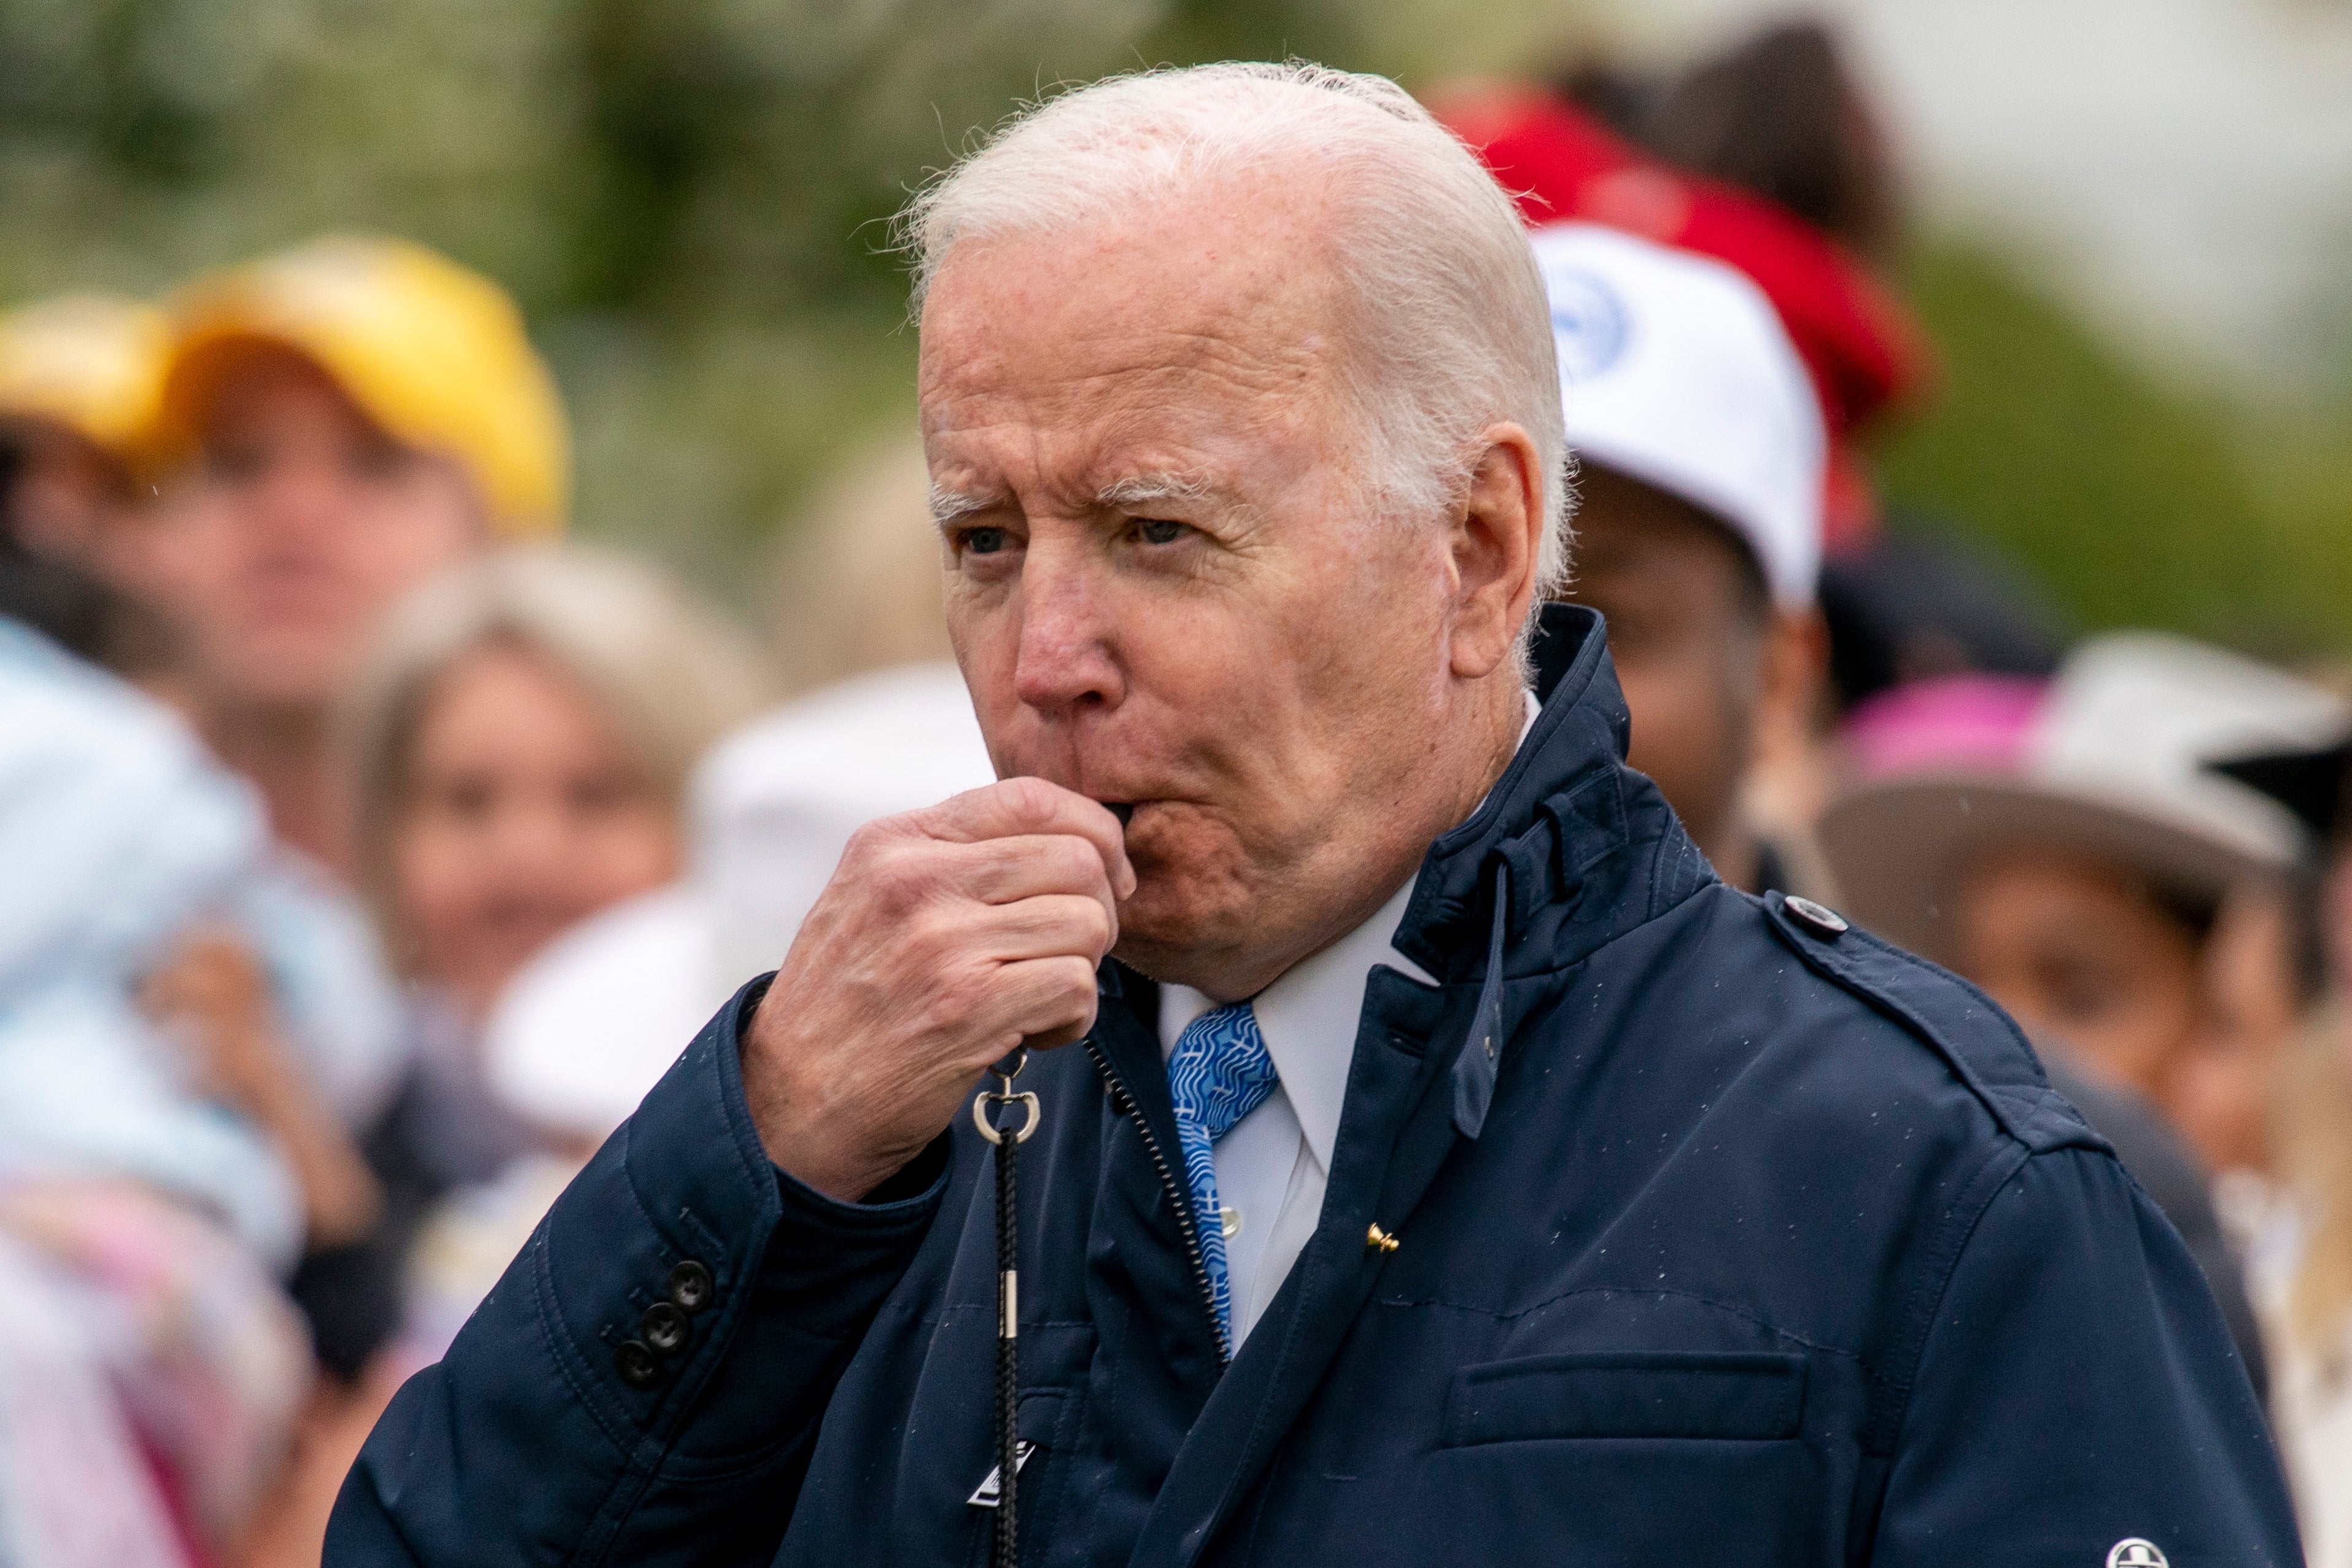 Biden says he released his tax returns, ‘unlike some other presidents’